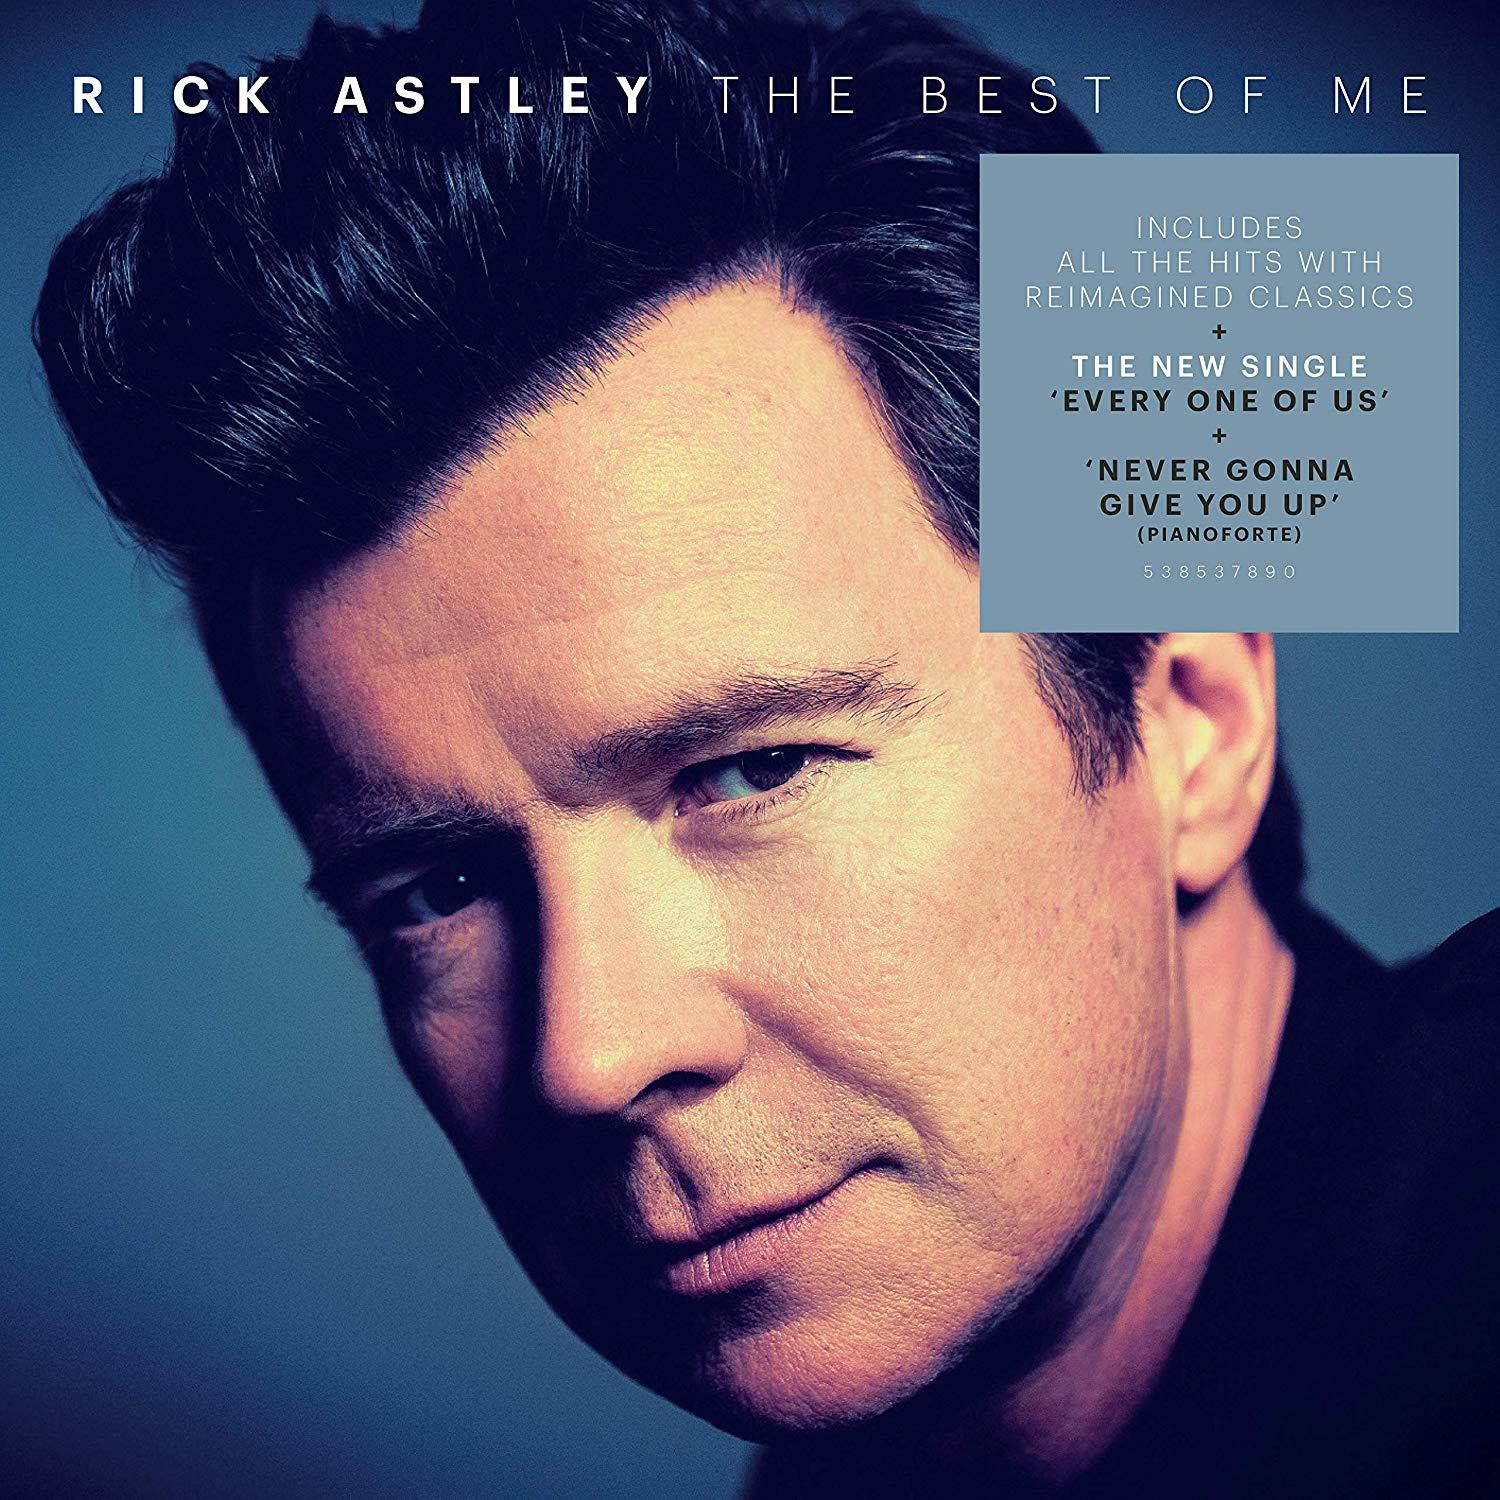 - Rick (CD) The Me (Deluxe Of Edition) - Best Astley